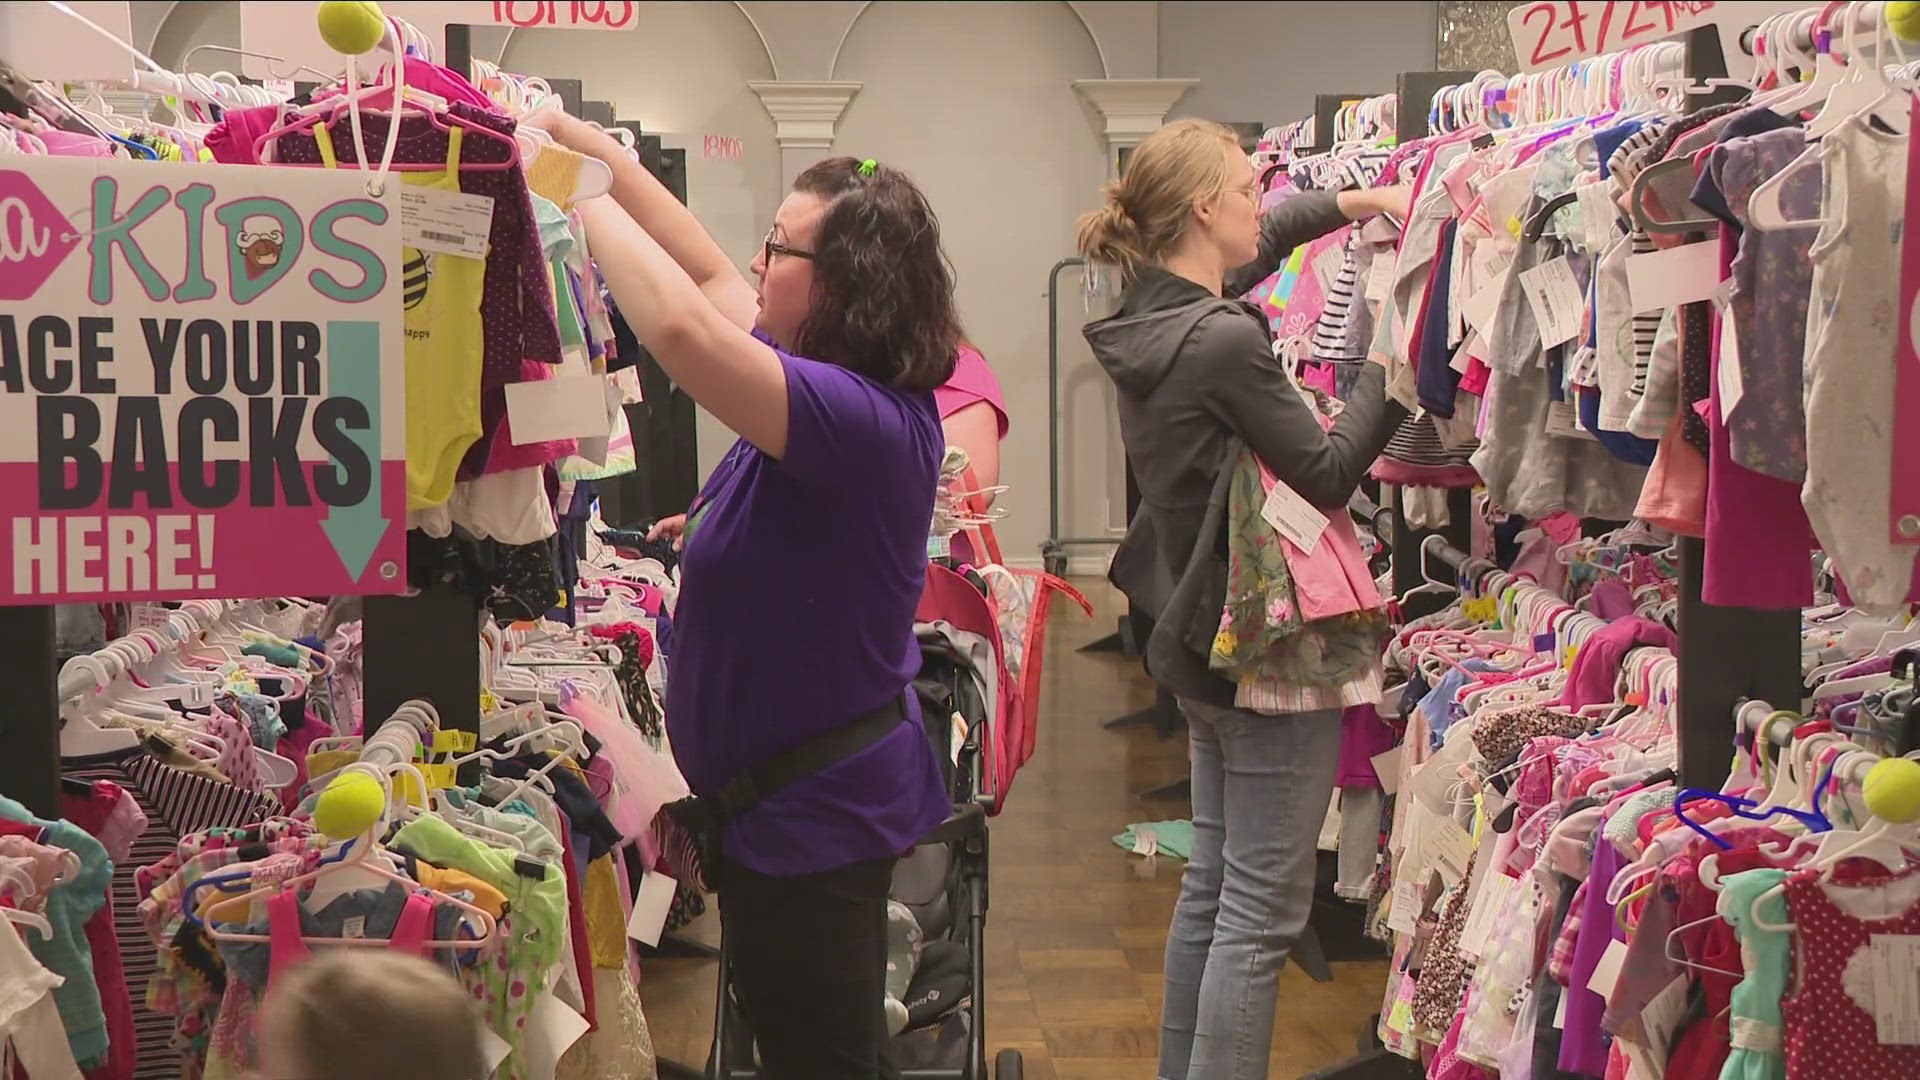 Bella Kids hosted the sale, which not only offers deals on kid's clothes and toys, but also raises money for local charities.